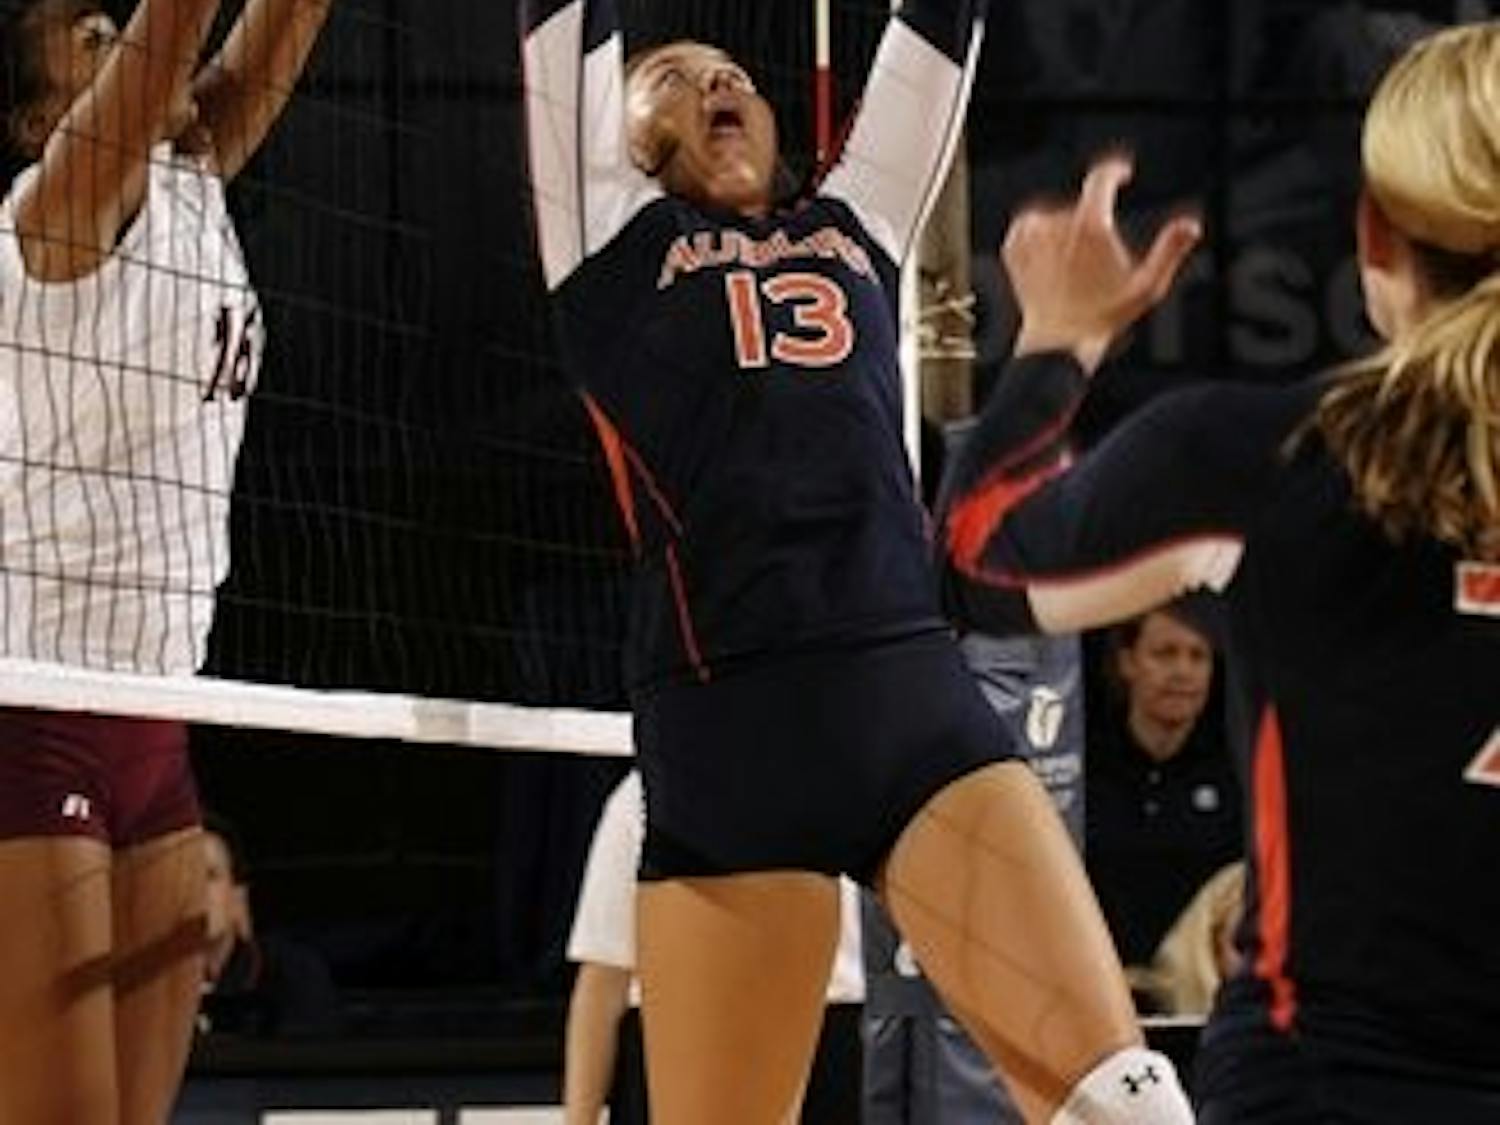 Solverson has 725 assists on the women's volleyball team. (Todd Van Emst / Media Relations)